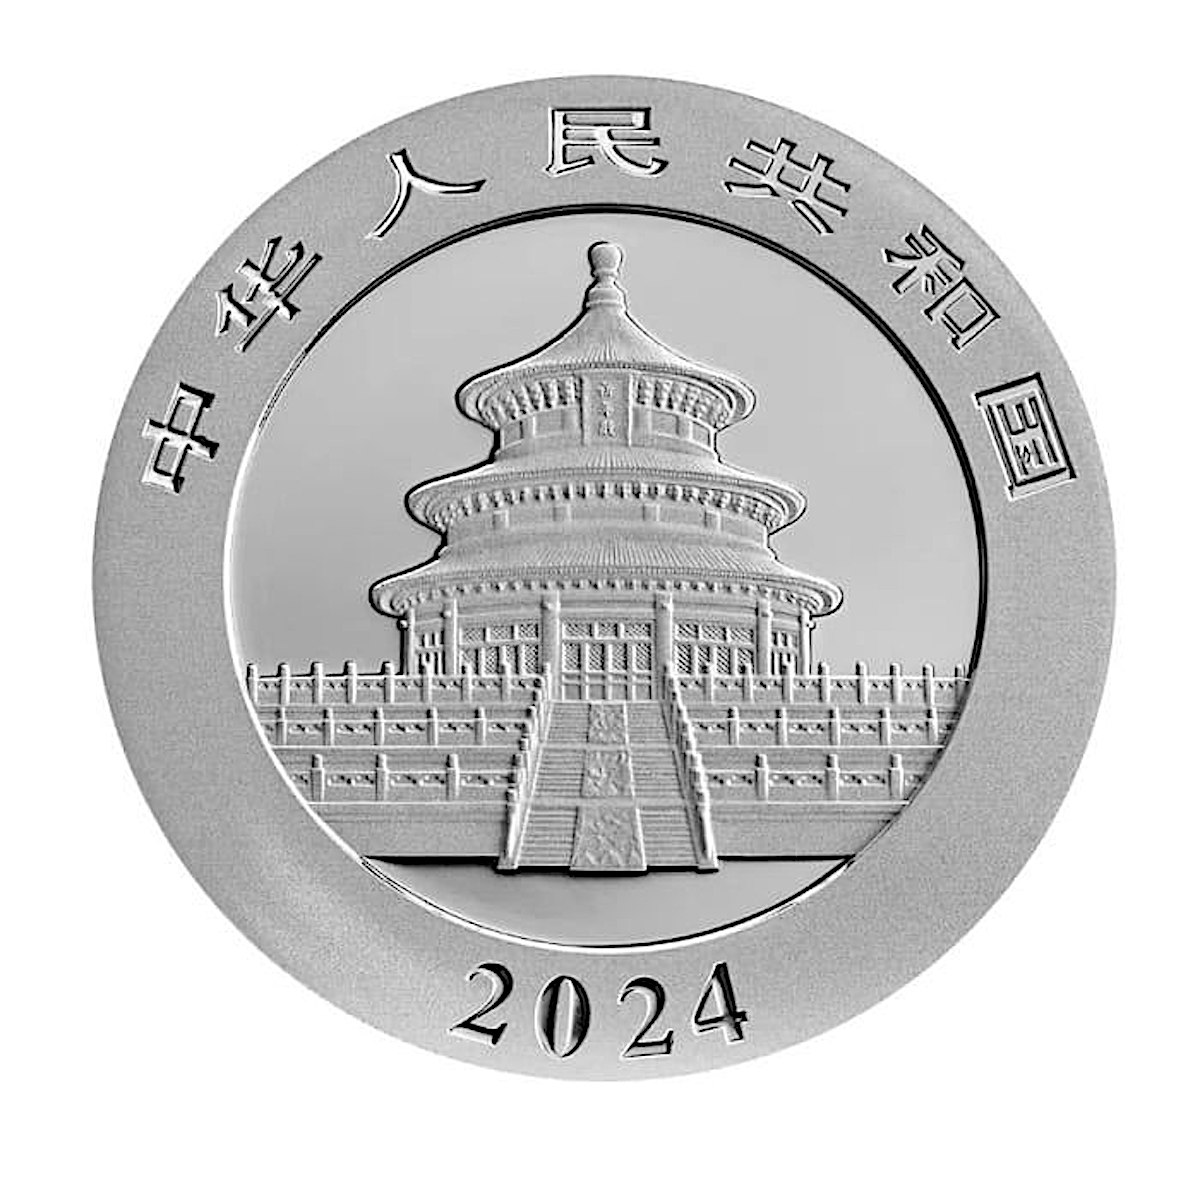 1200 1200 Silver Coin Chinese Panda 30g 2024 Back 